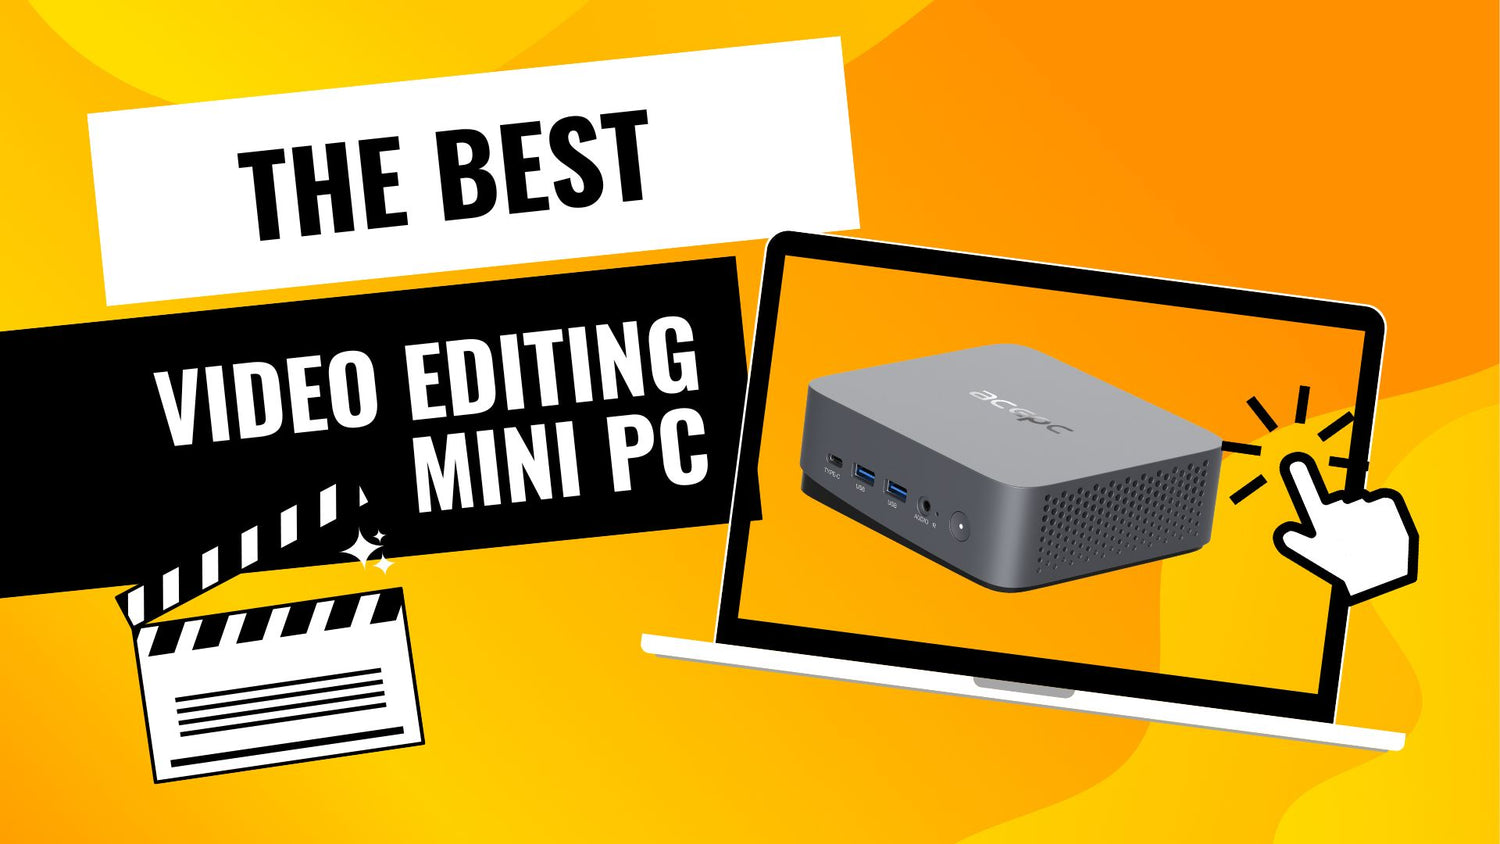 Is the Mini PC good for media editing?